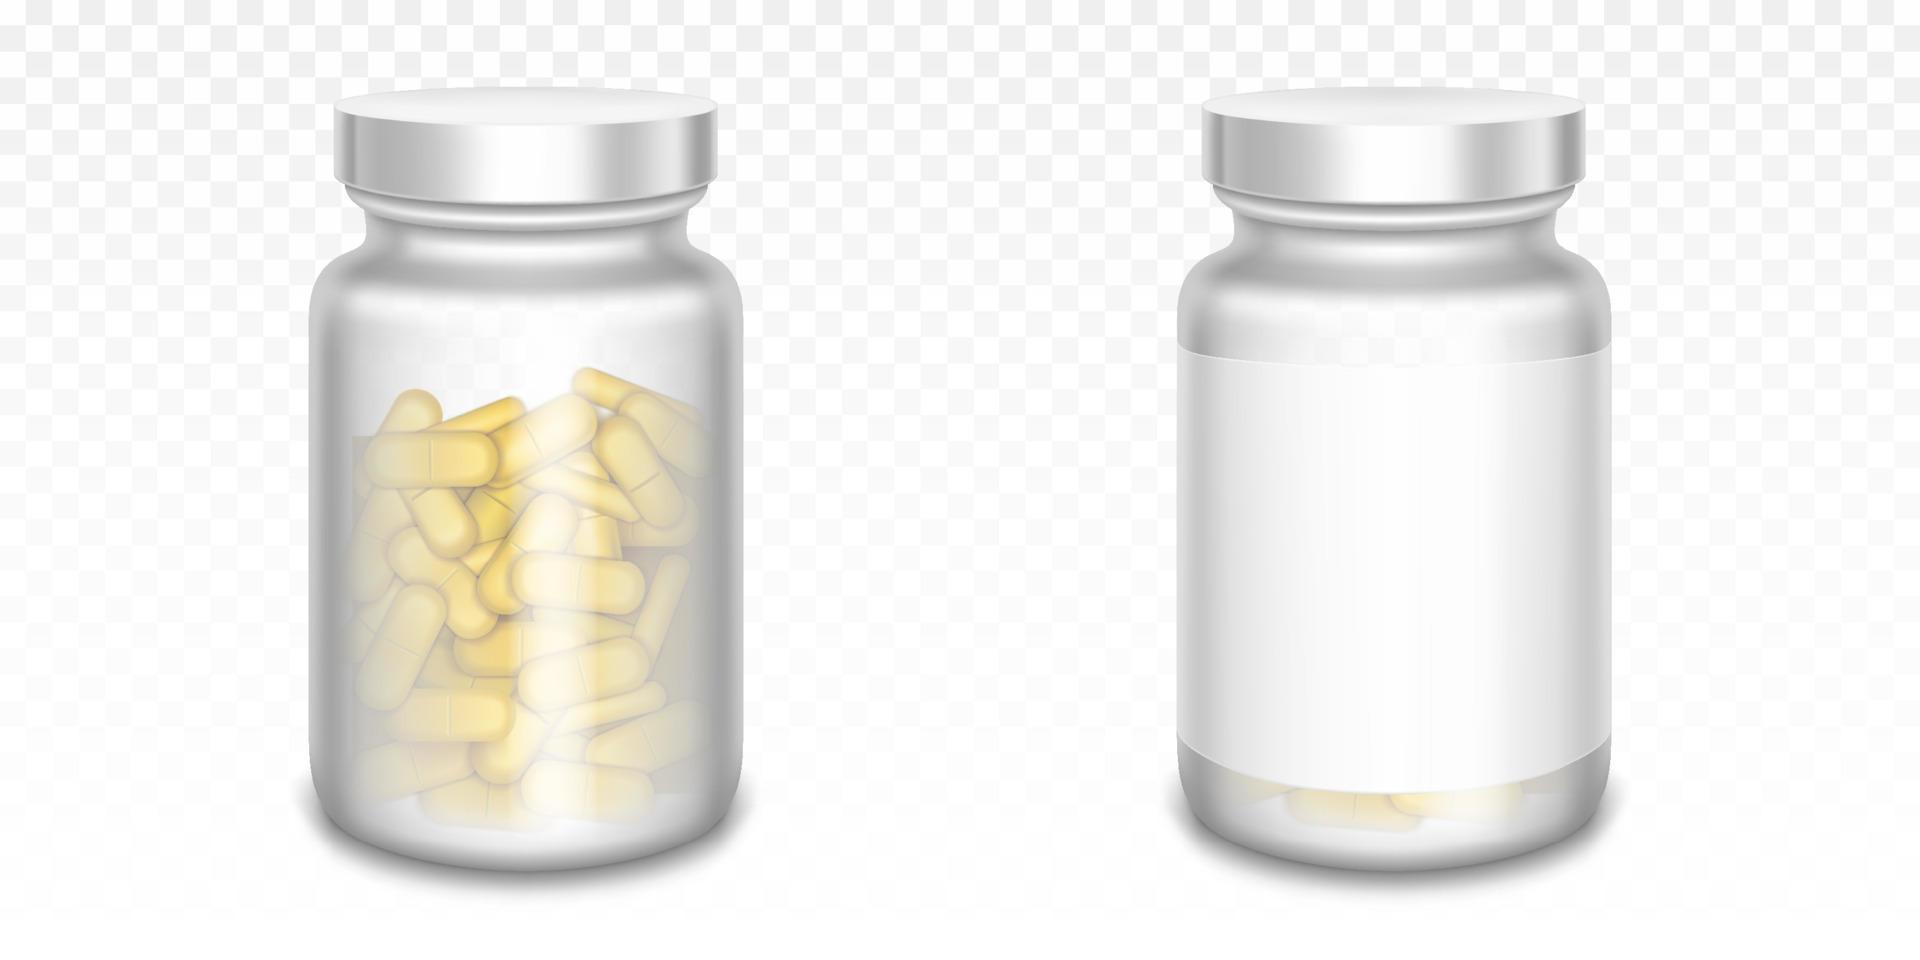 Medicine bottles with yellow pills and blank label vector